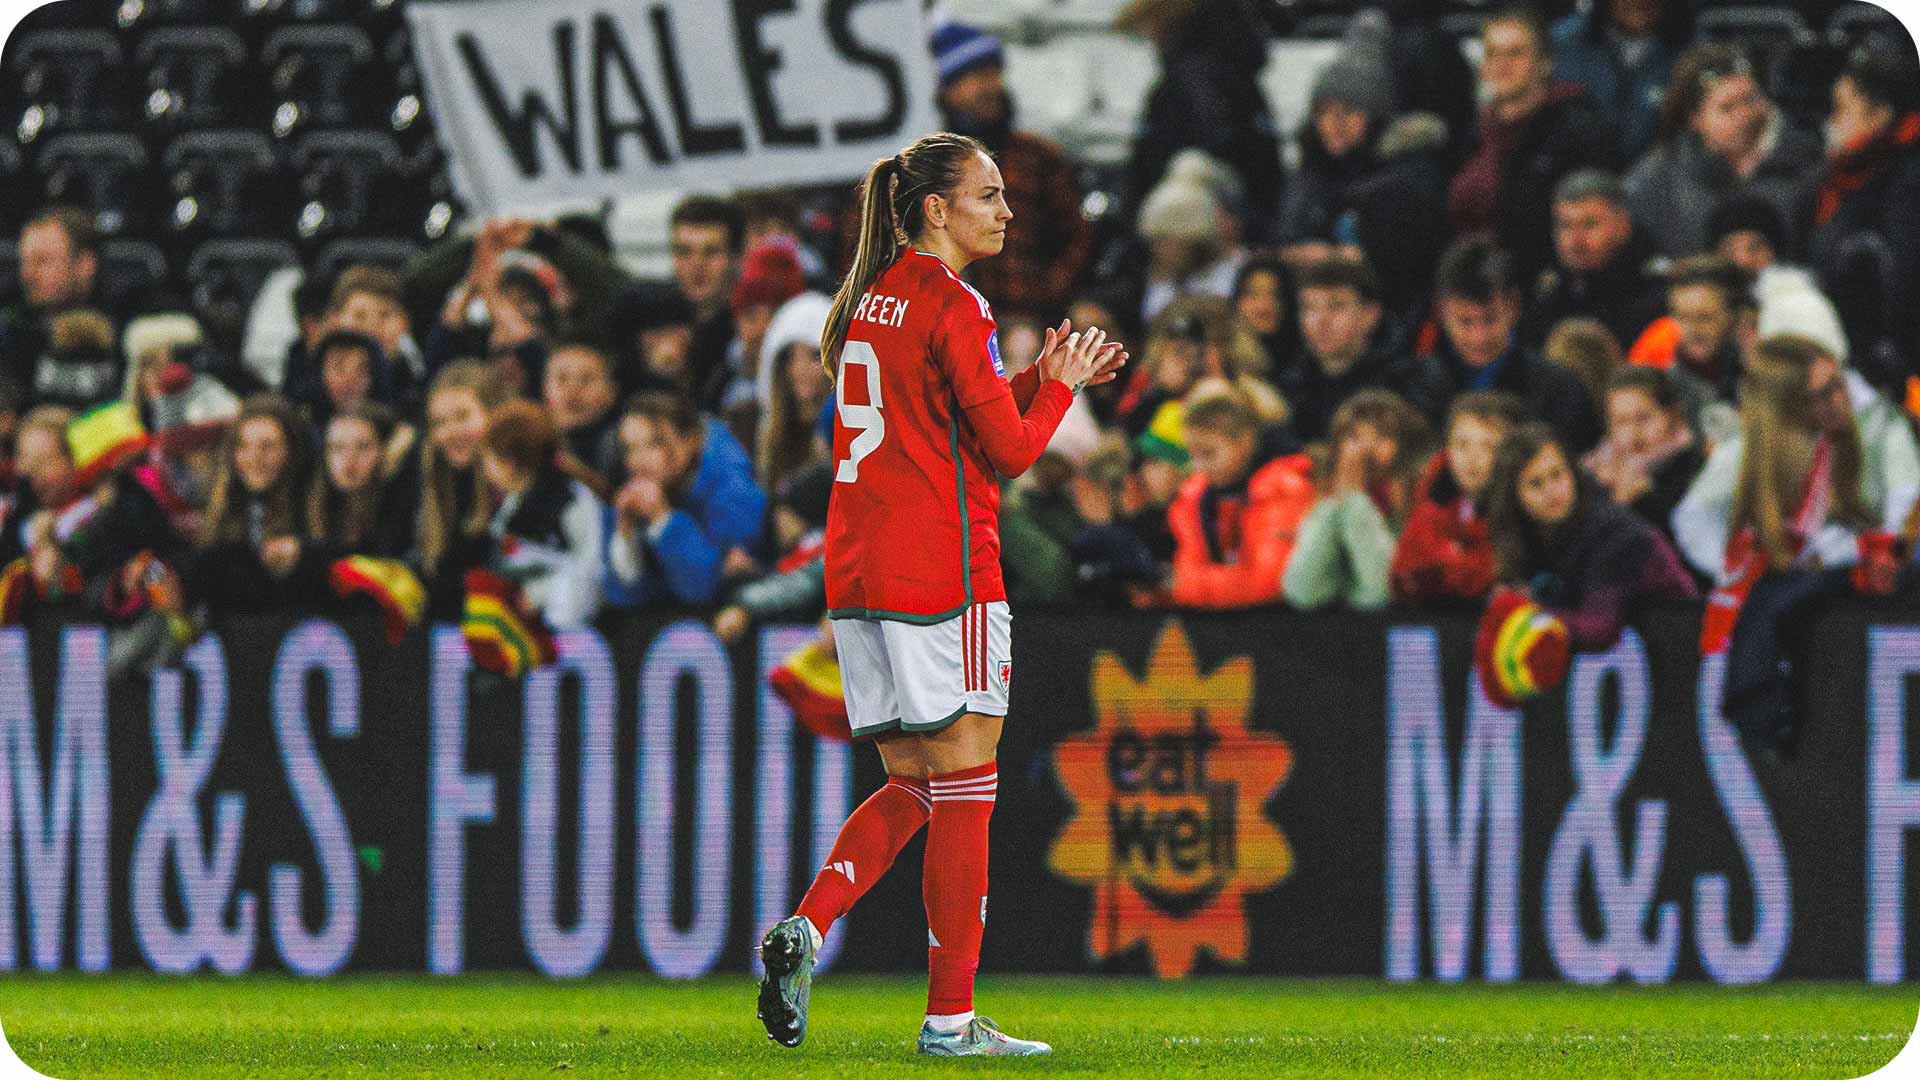 Photograph during the Wales Women game hosted at the Swansea.com stadium